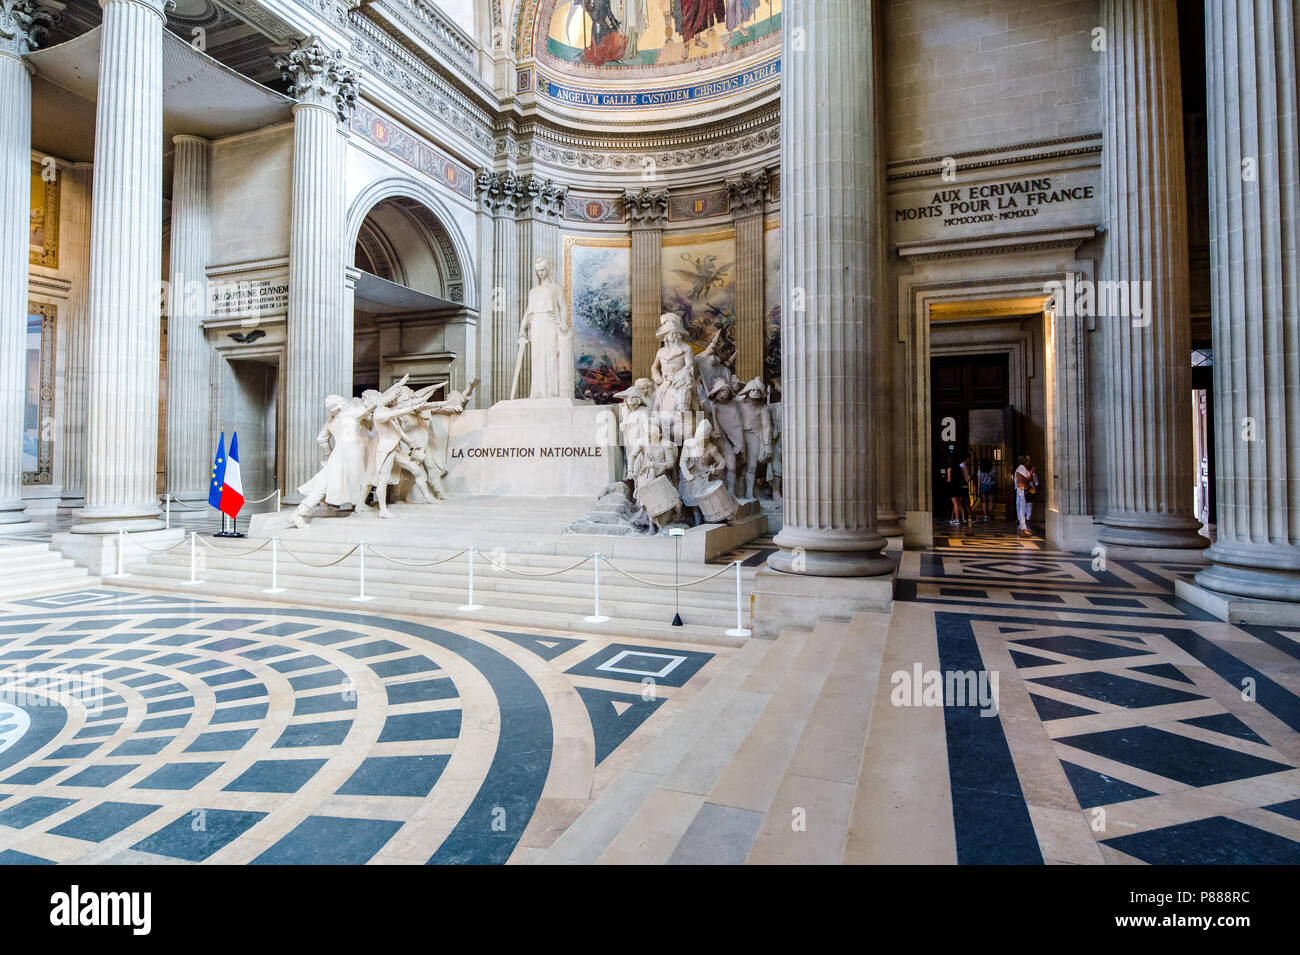 La Convention Nationale statue in the Pantheon in Paris, France Stock Photo